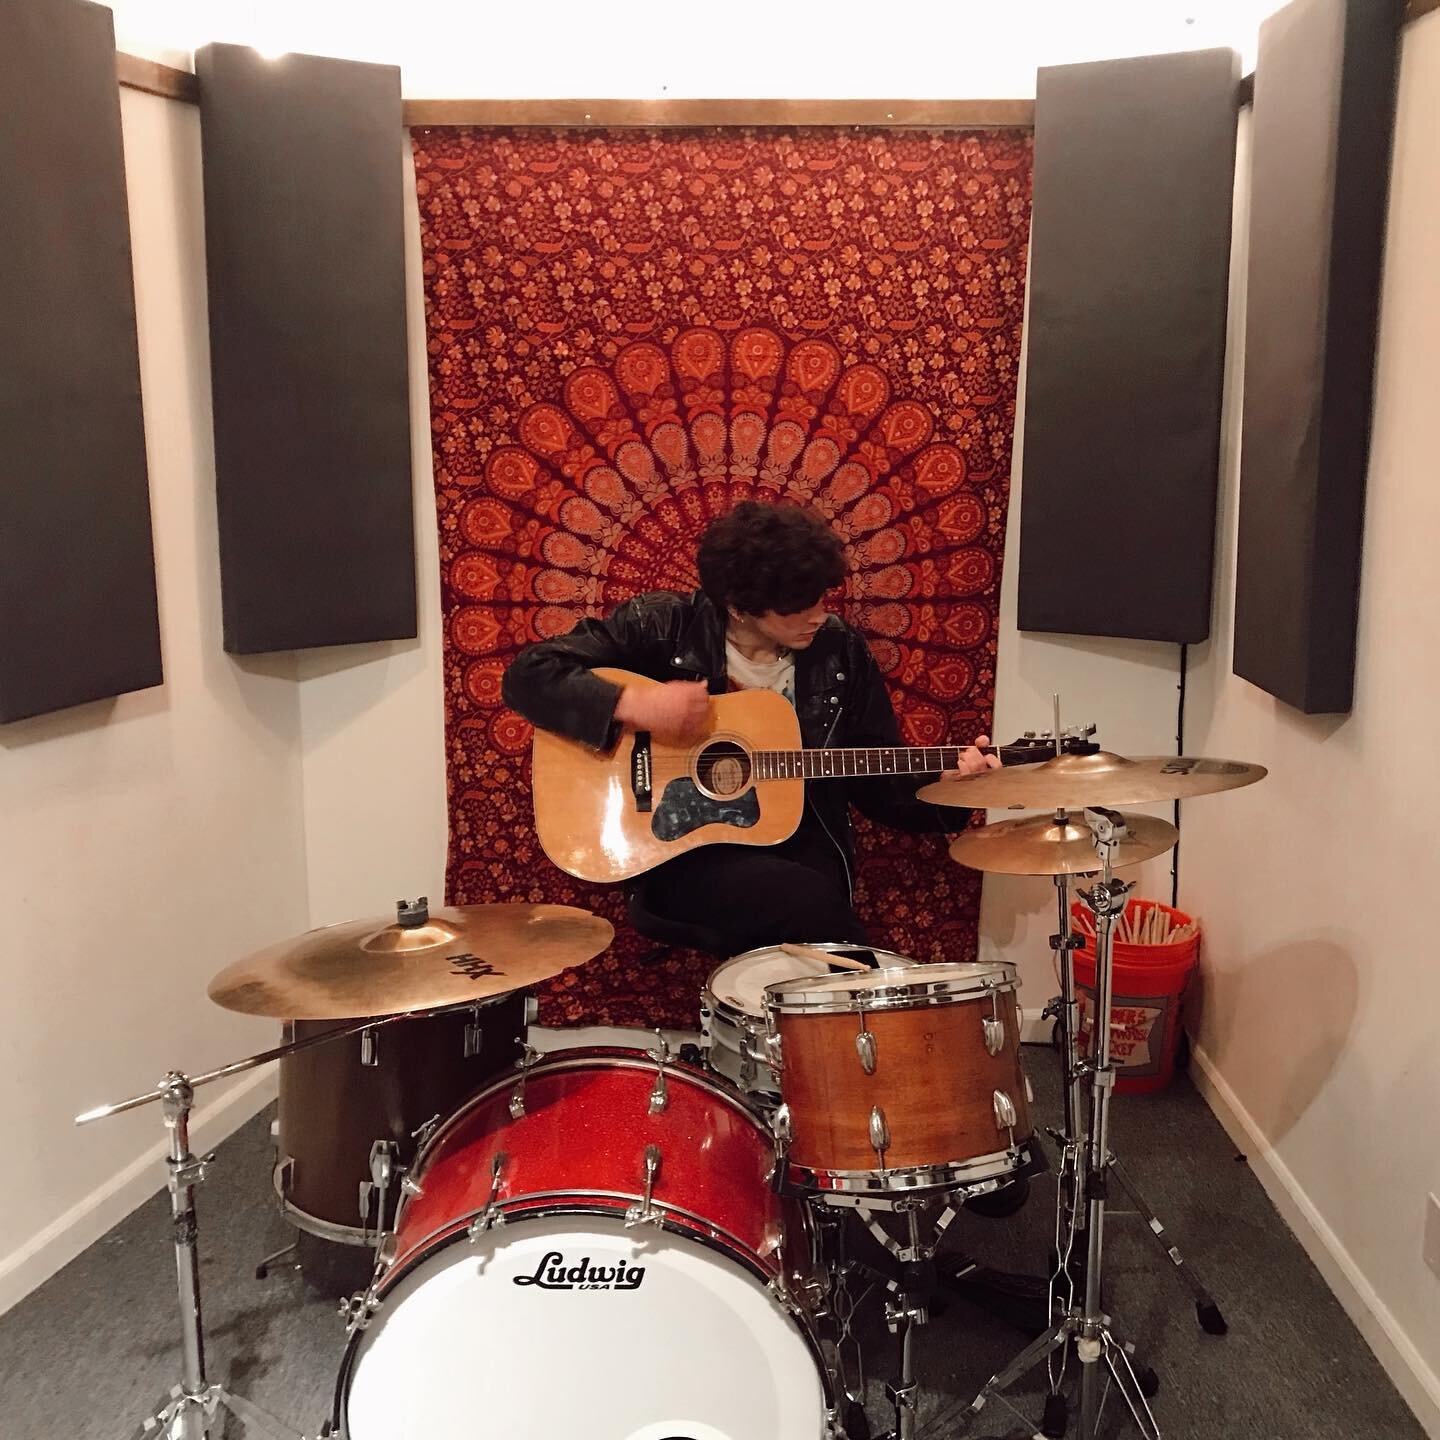 Who&rsquo;s excited for new music from @wyndupkid? 🙋🏻&zwj;♀️ 🙋🏻 
.
.
.
.
.
.
.
#njmusic #recordingstudio #njmusician #newmusic #indiemusic #indiemusician #freeholdnj